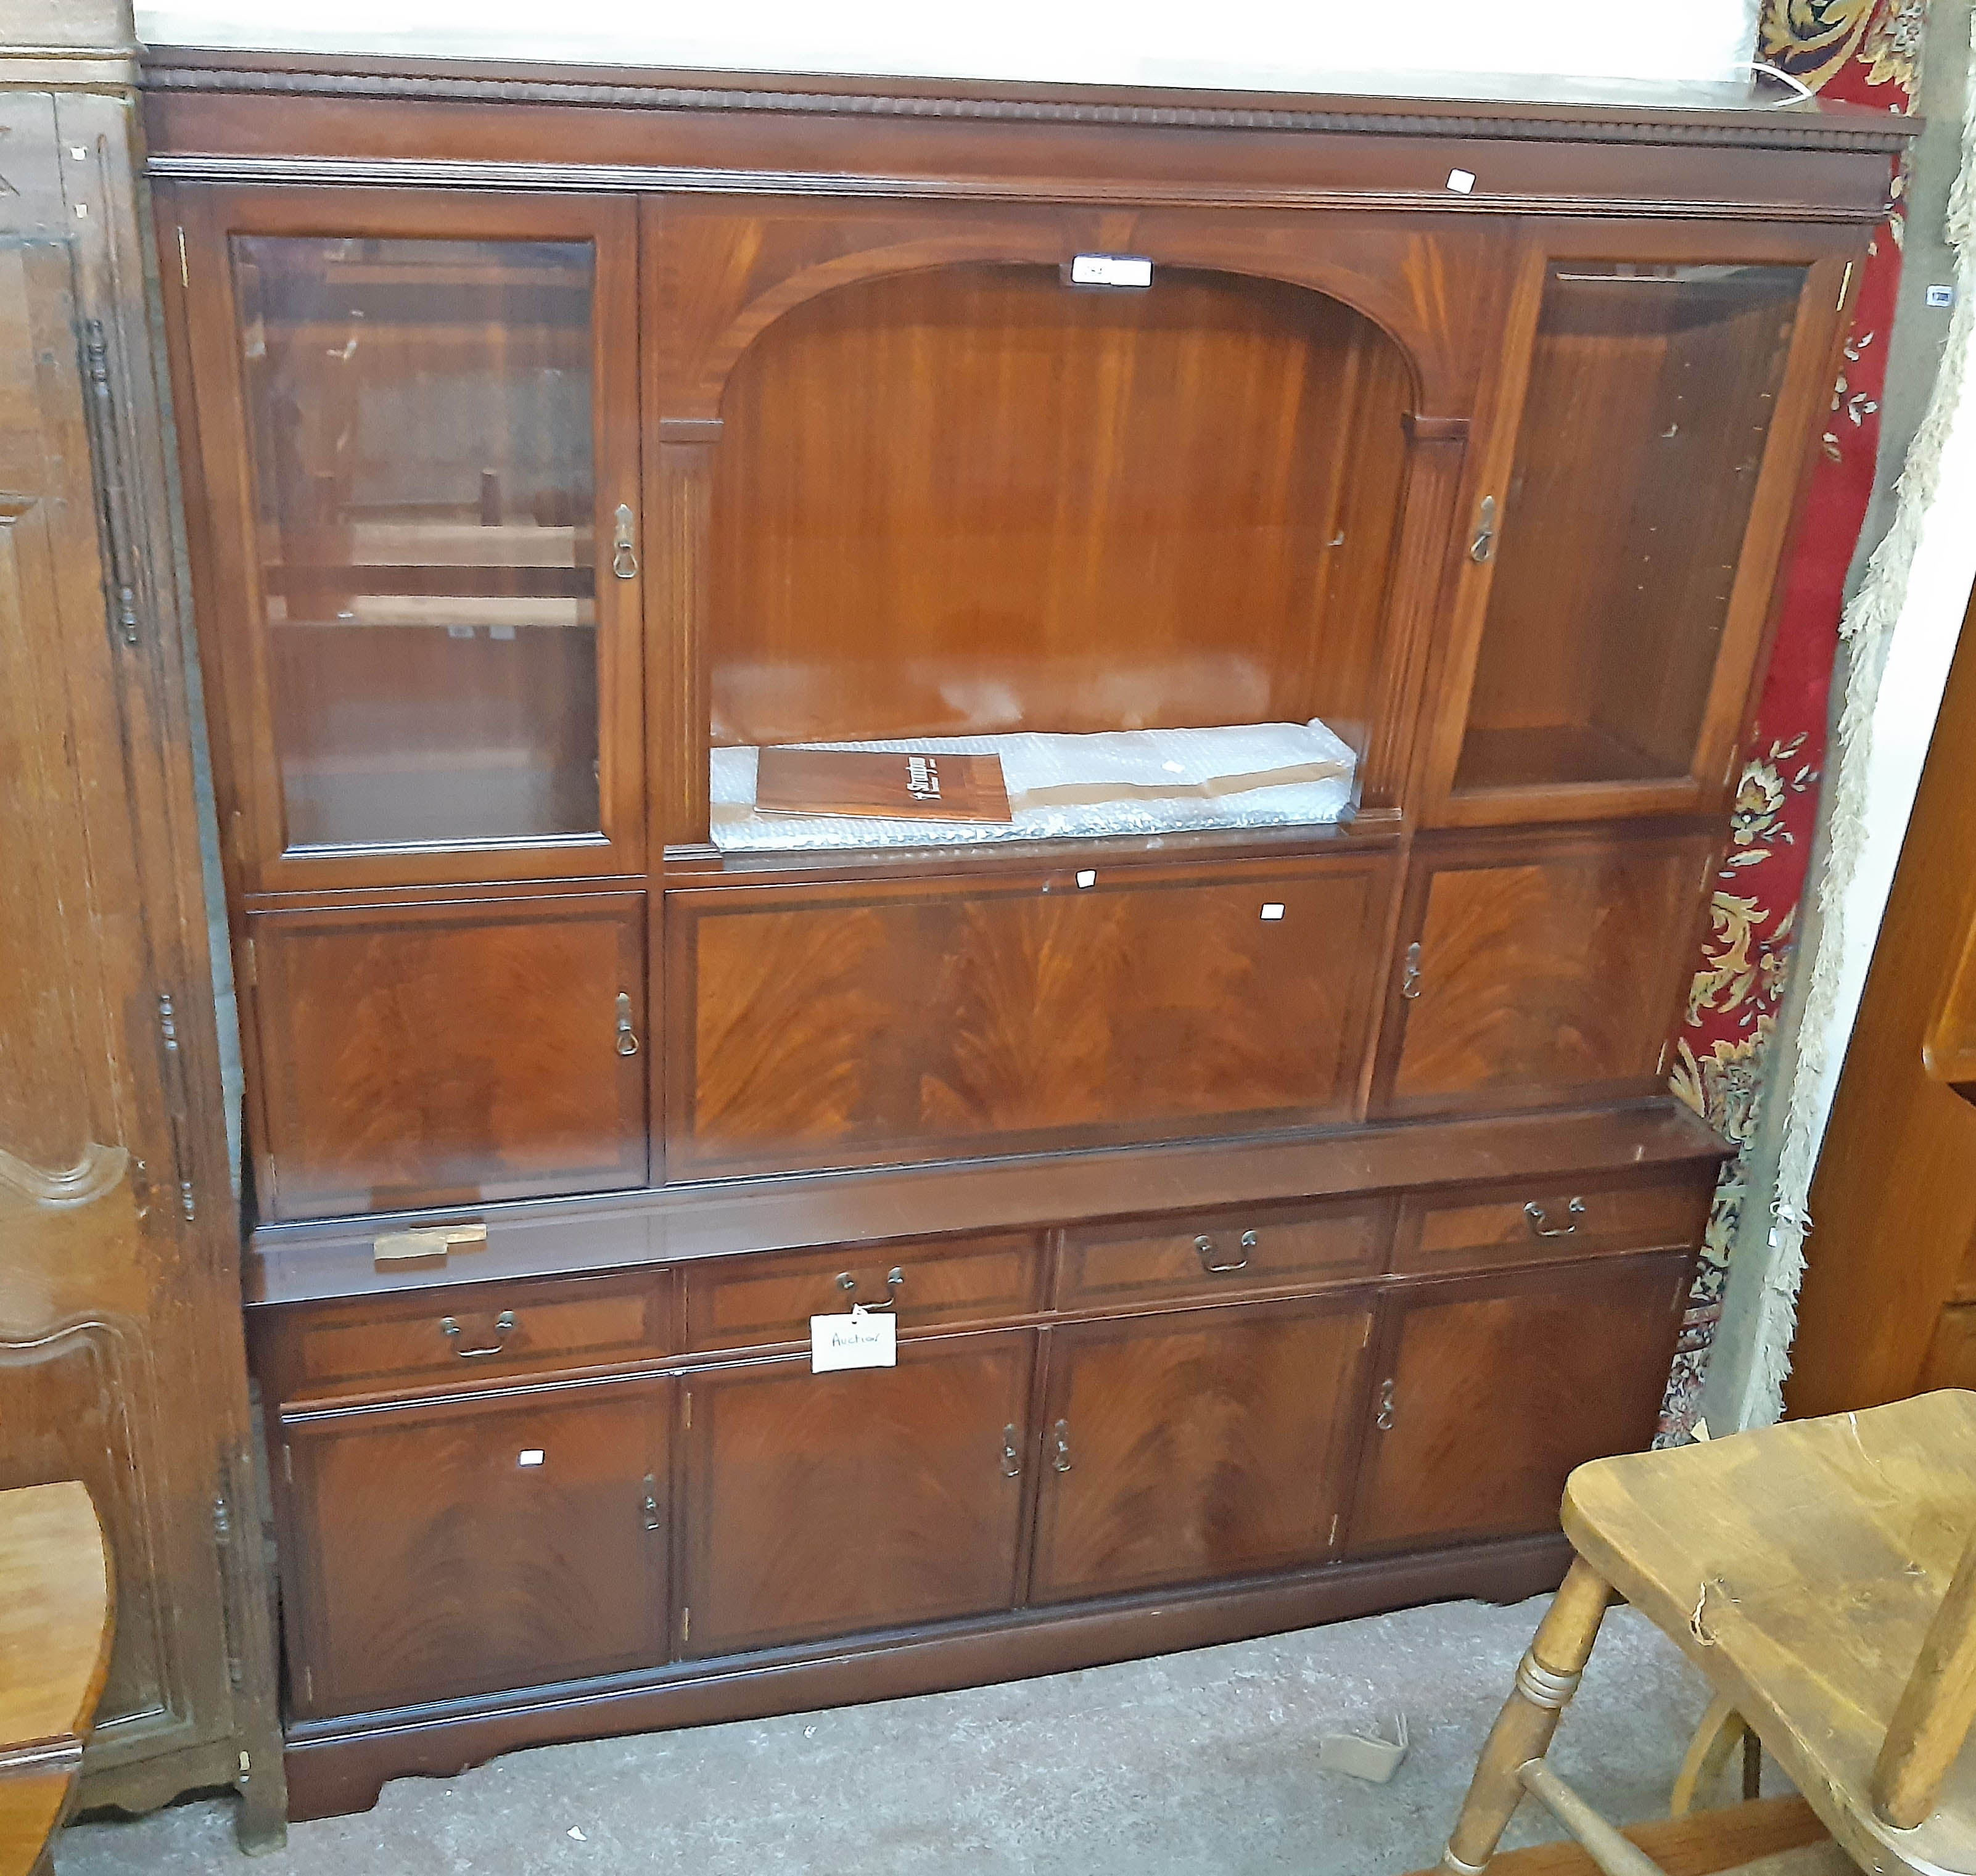 A 6' Stronbow Furniture reproduction mahogany two part wall unit with central arched recess,